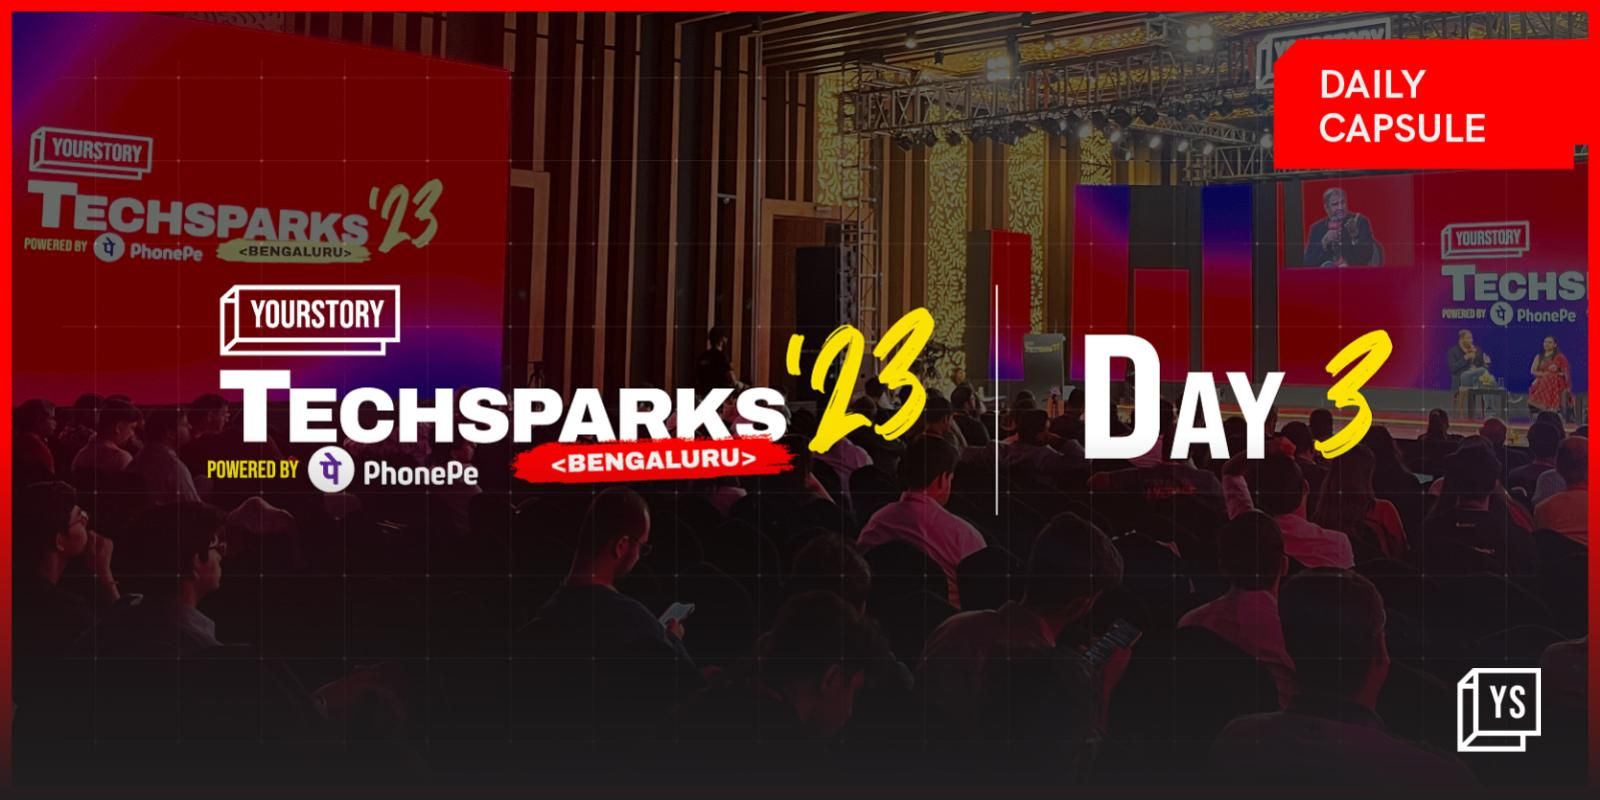 What not to miss on final day at TechSparks '23 